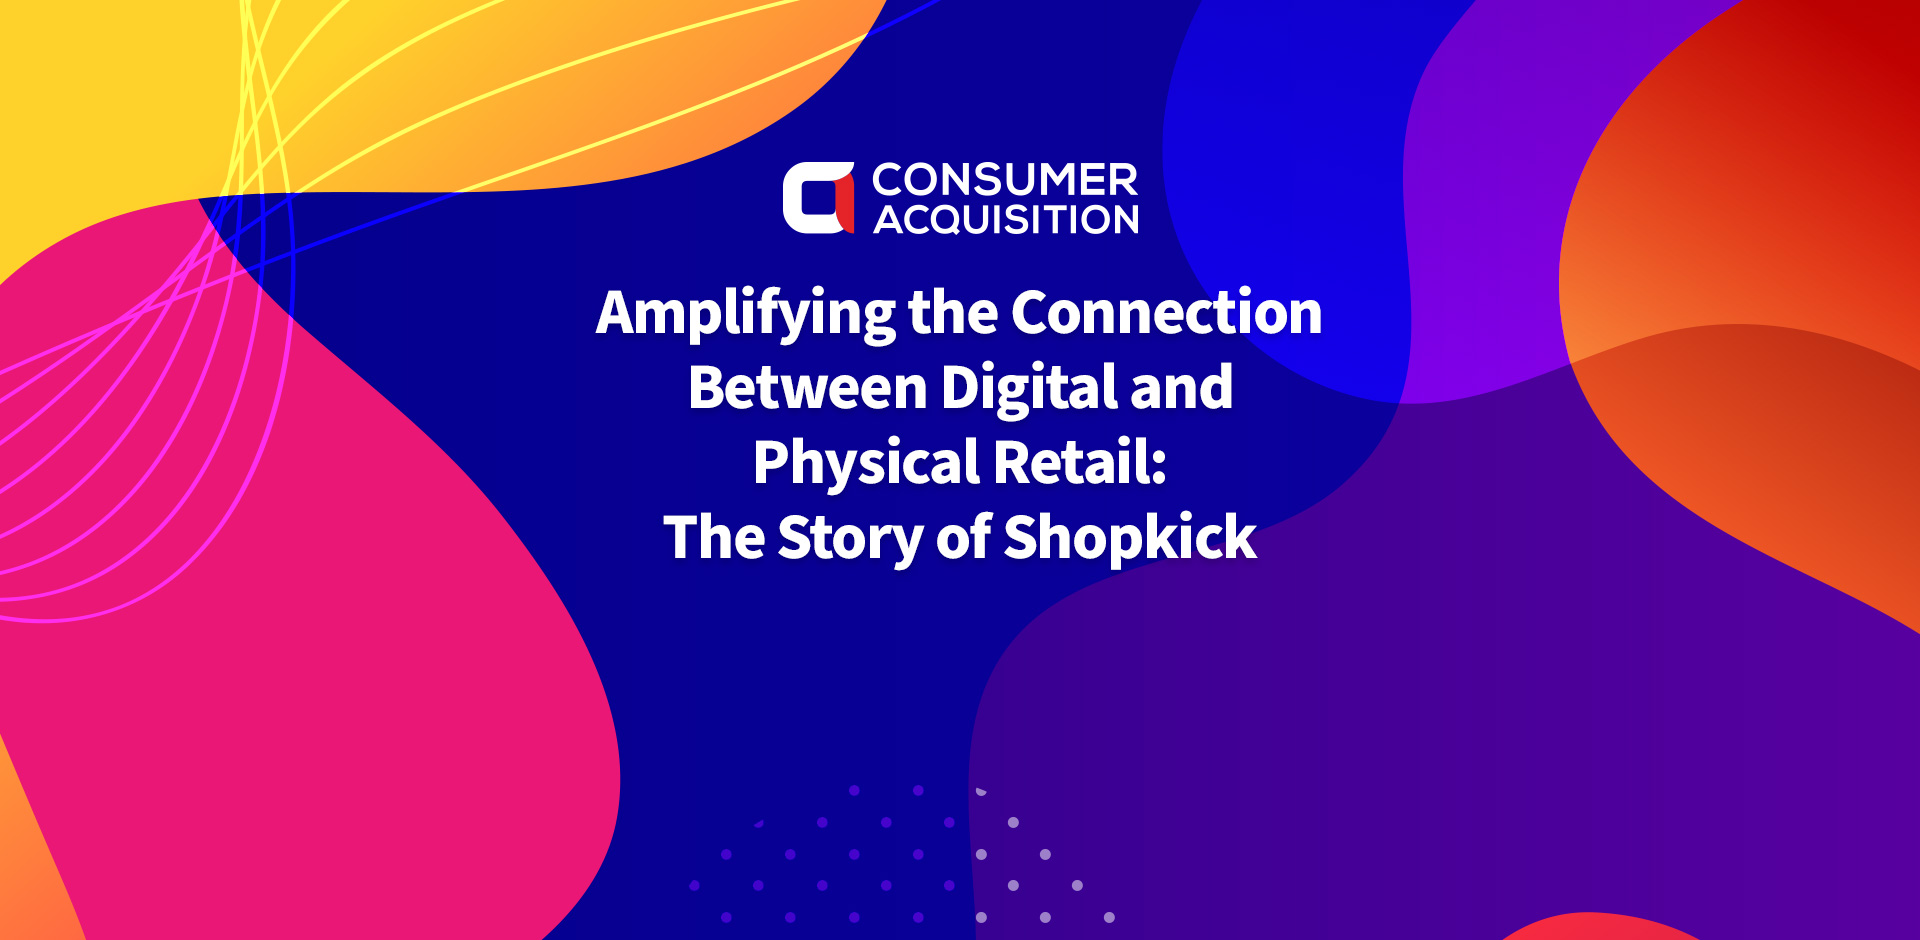 Amplifying the Connection Between Digital and Physical Retail: The Story of Shopkick